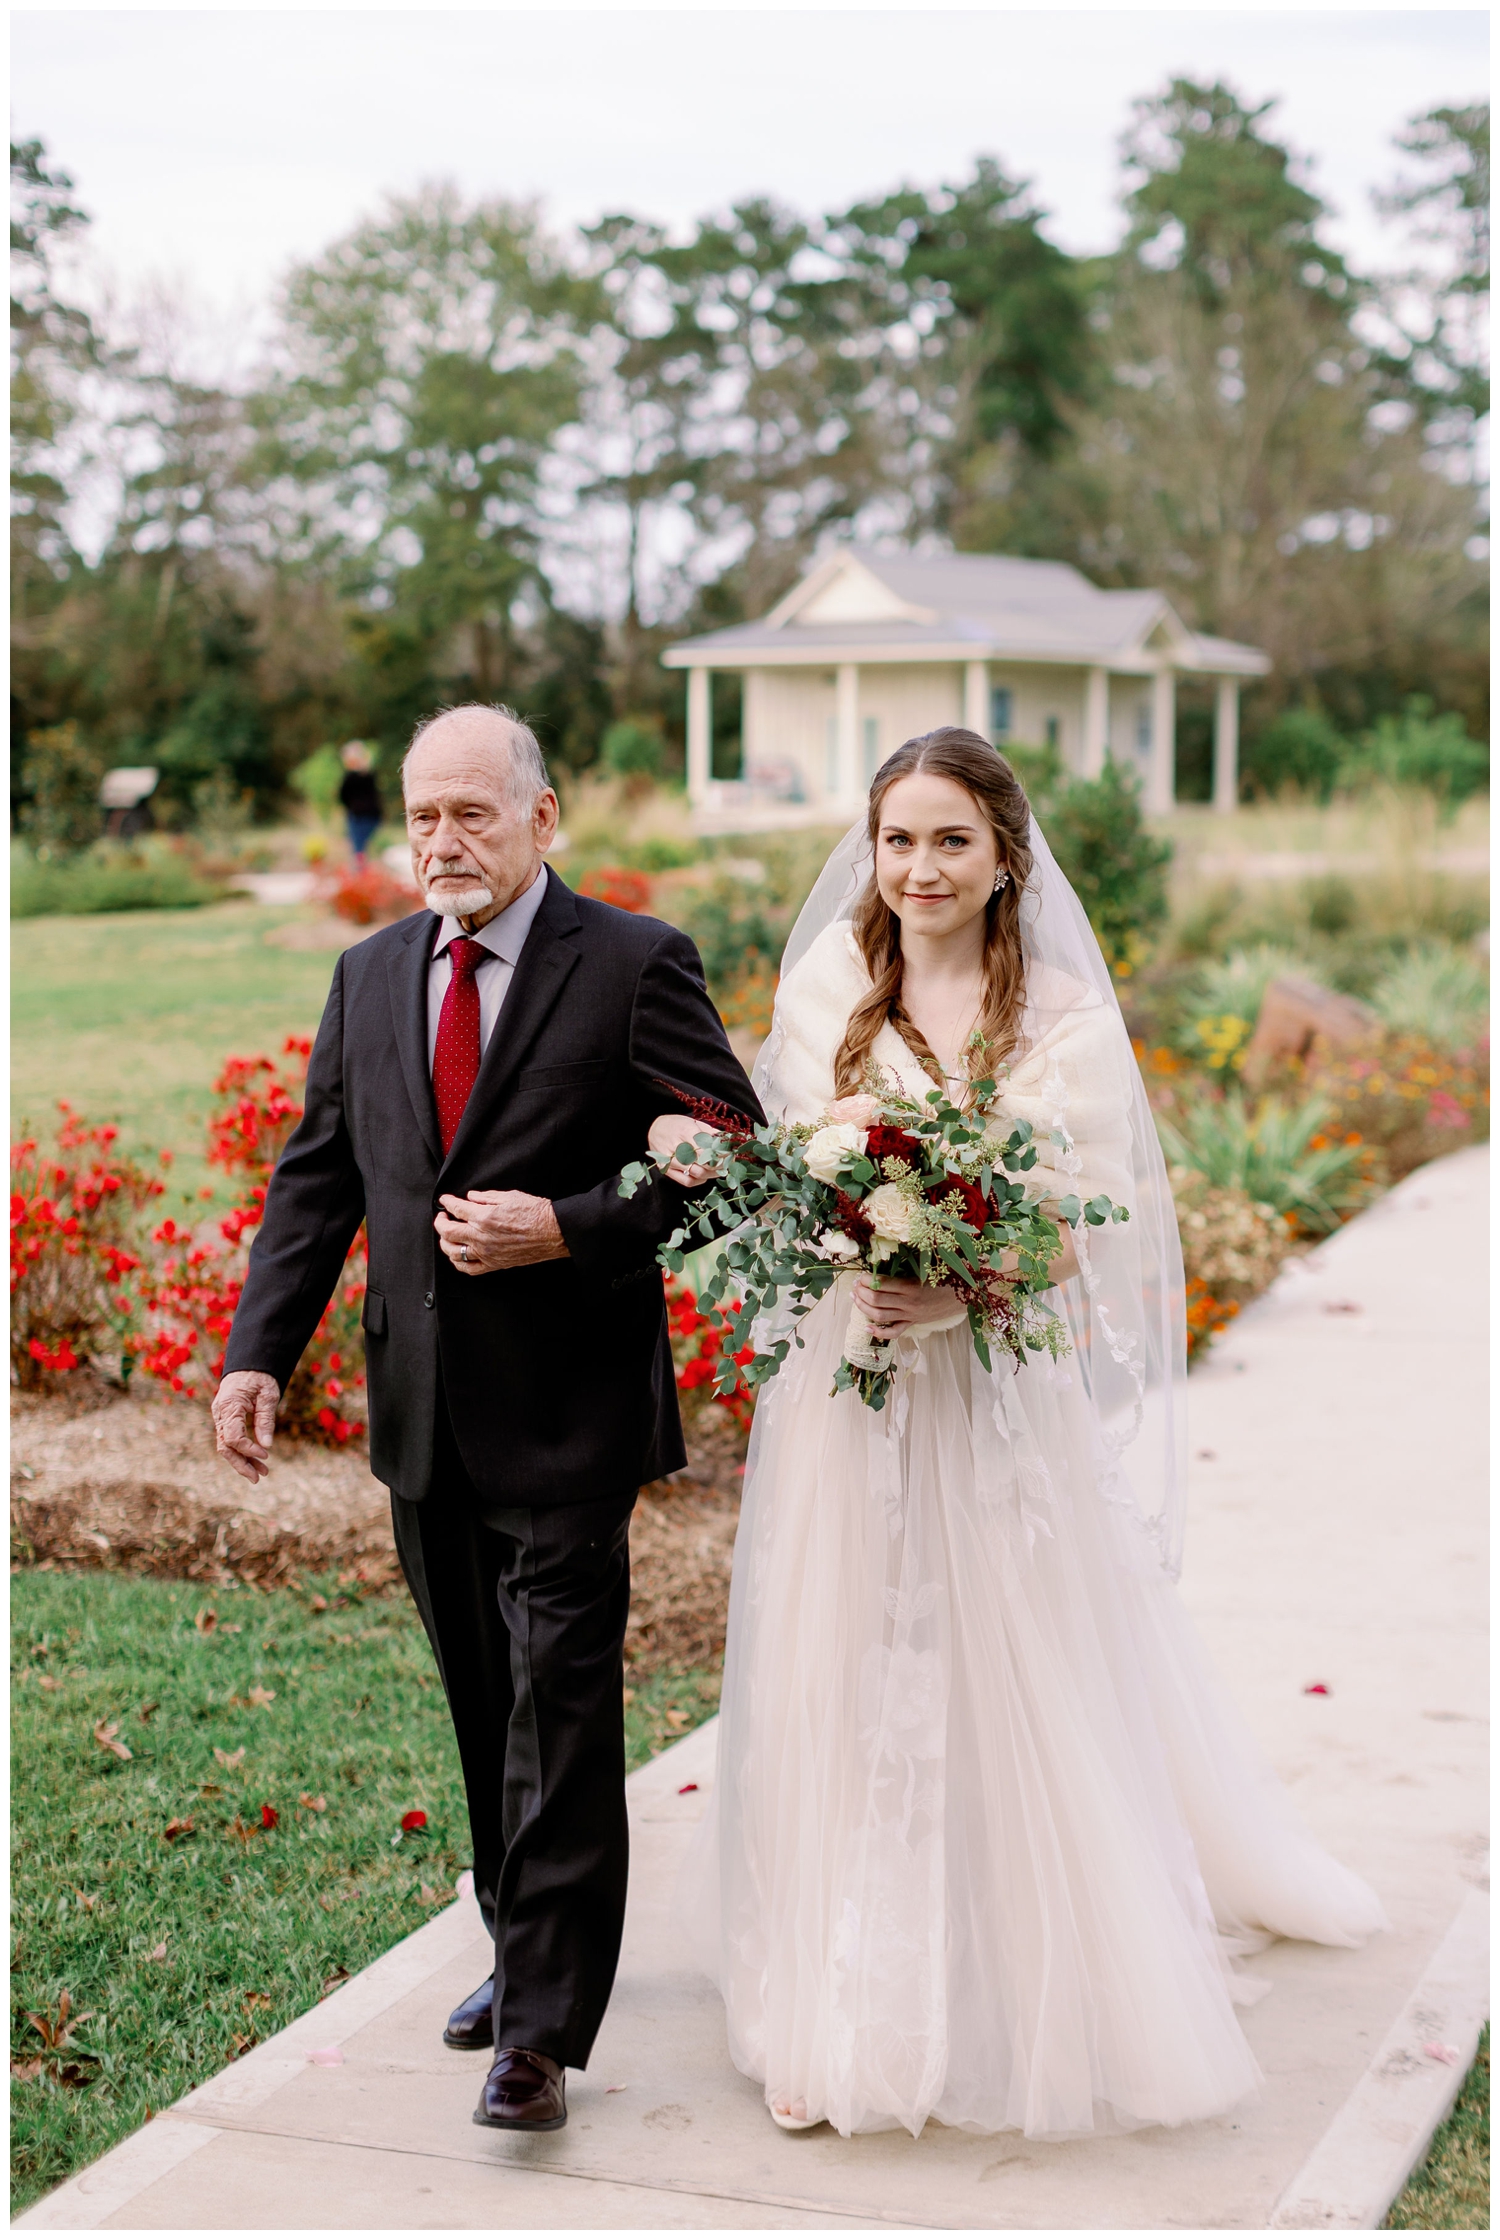 father escorting bride down the aisle at Union Ranch outdoor wedding ceremony